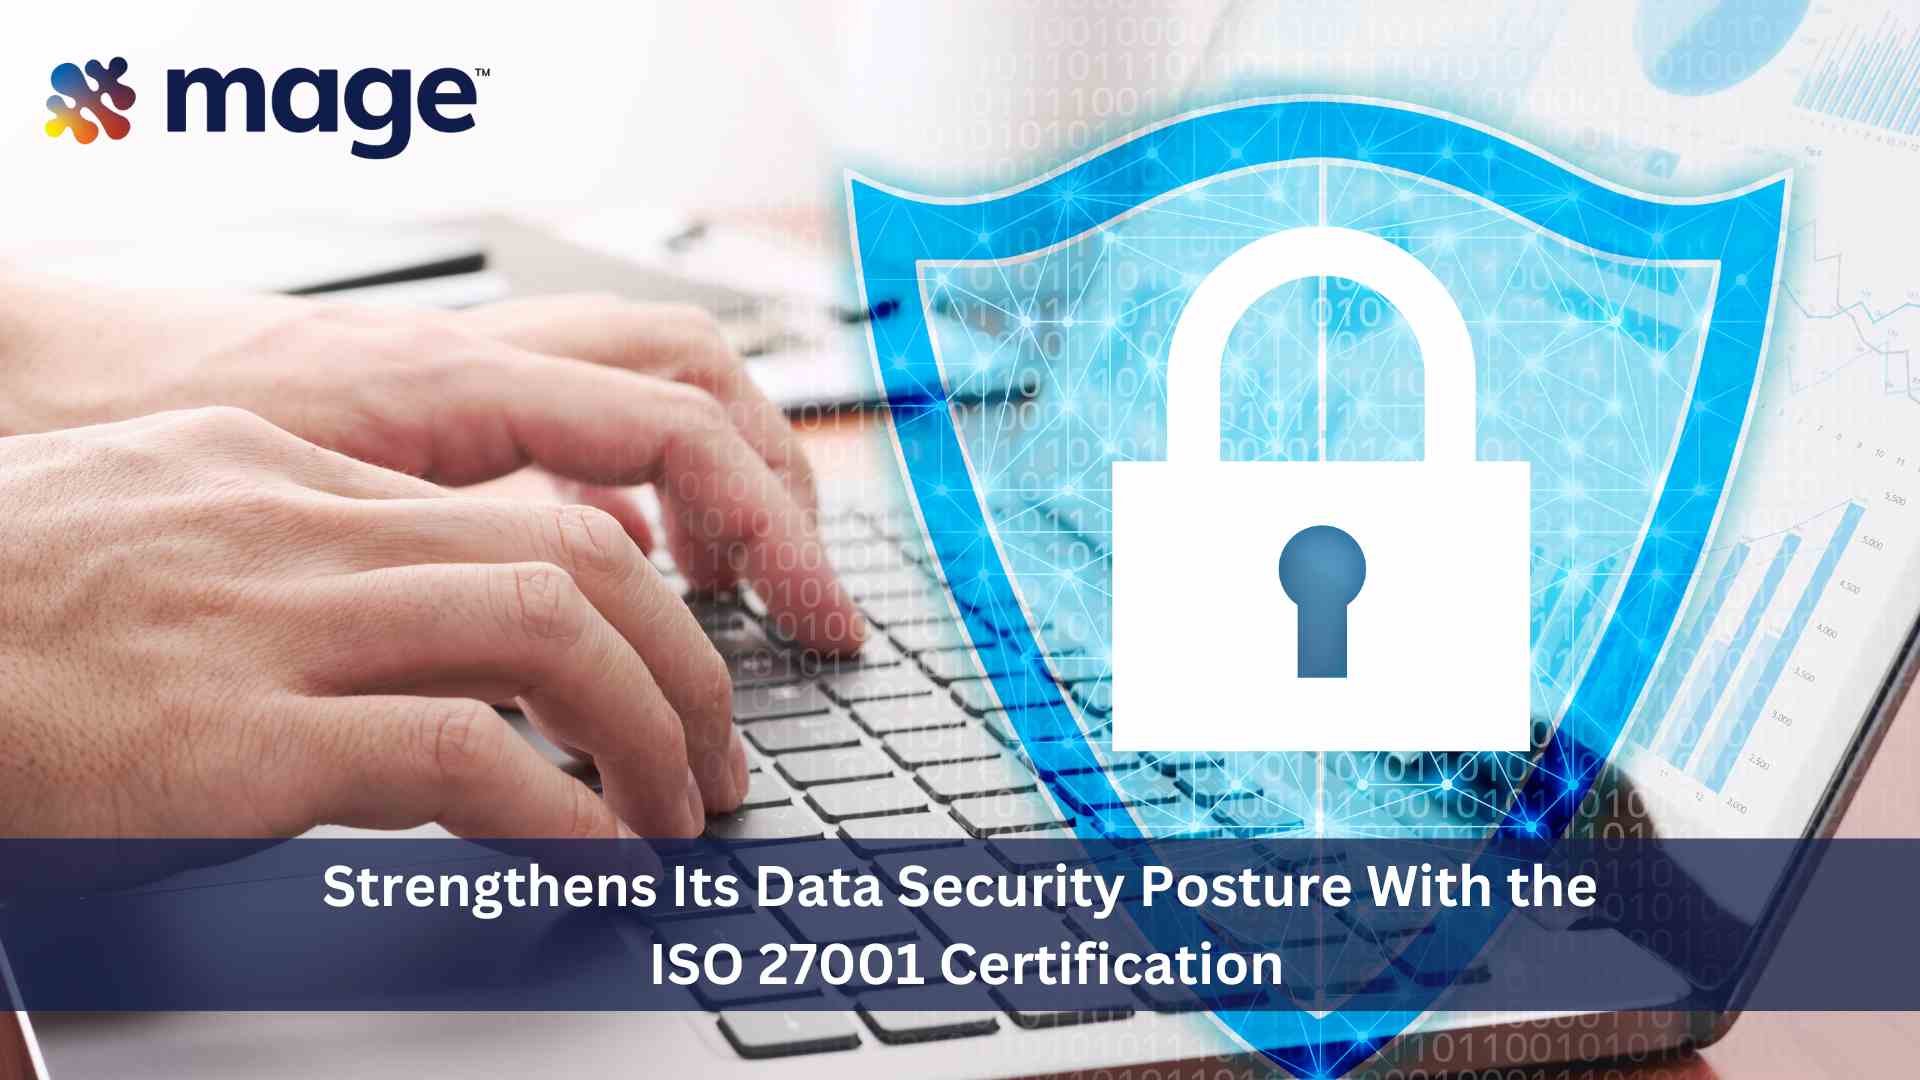 Mage Data strengthens its data security posture with the ISO 27001 certification